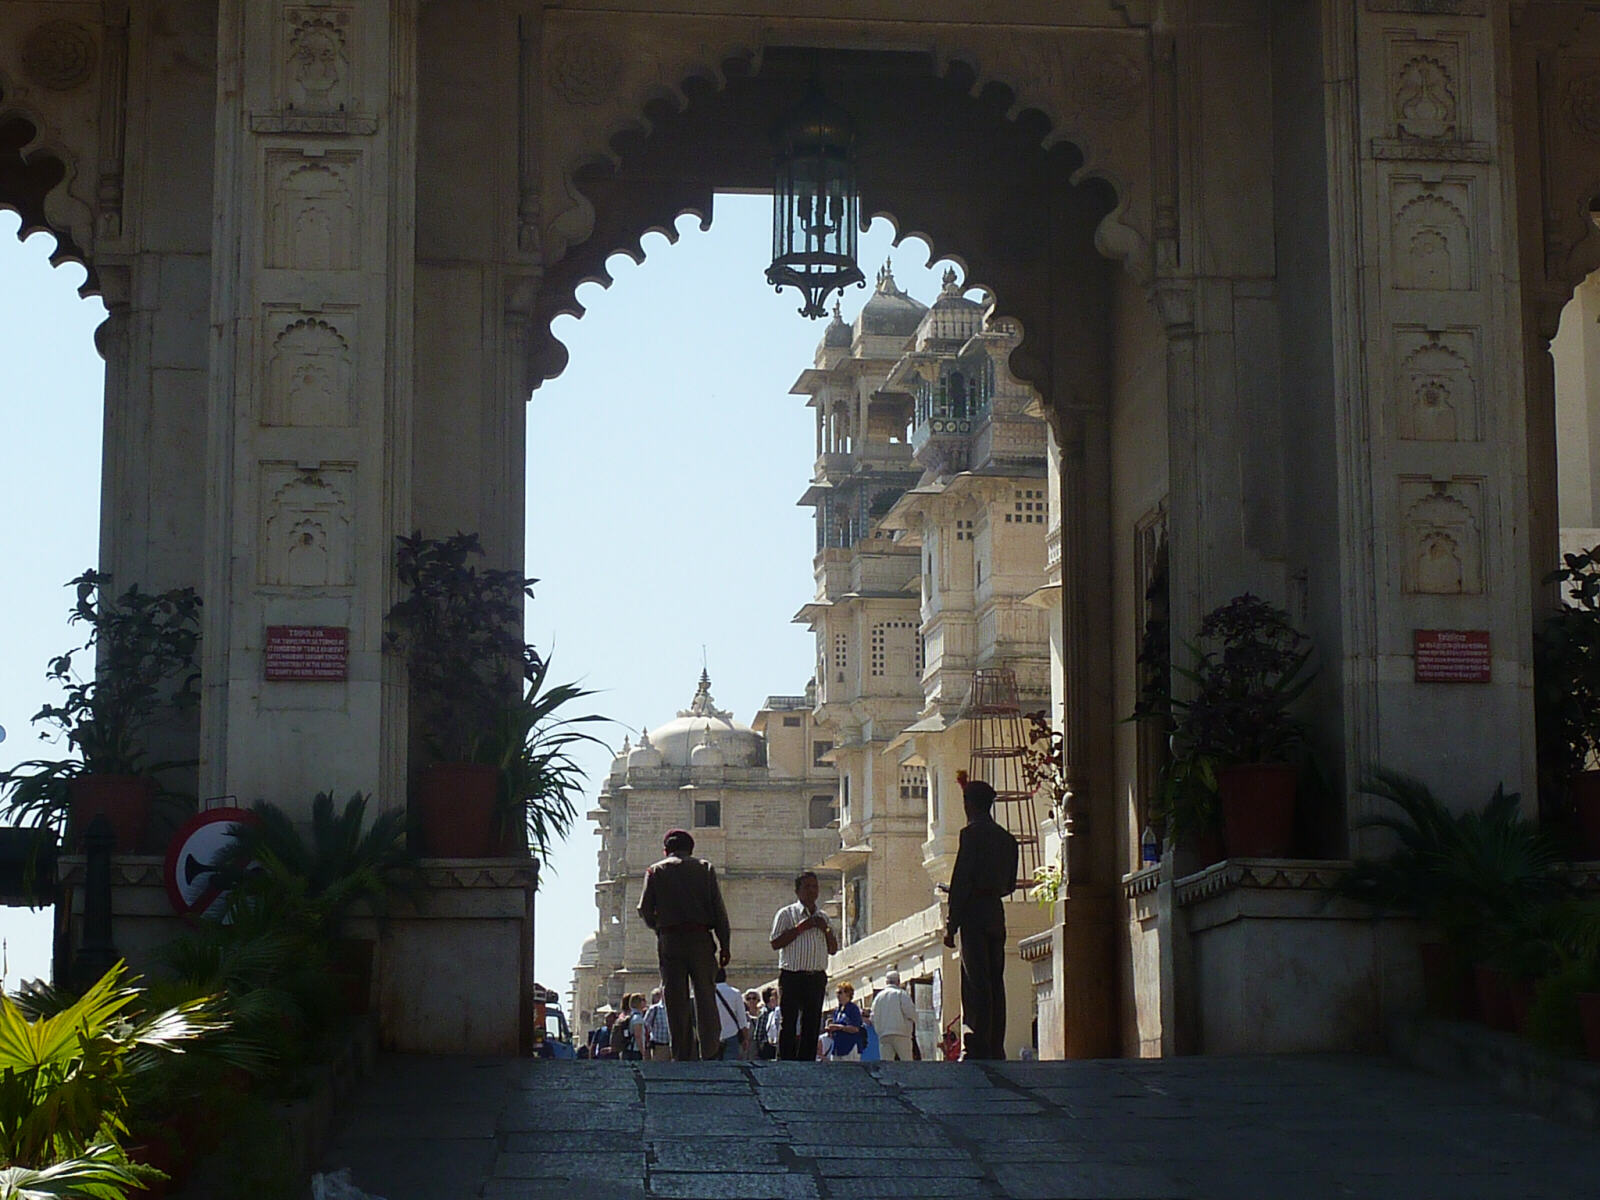 Gateway to the City Palace in Udaipur, Rajasthan